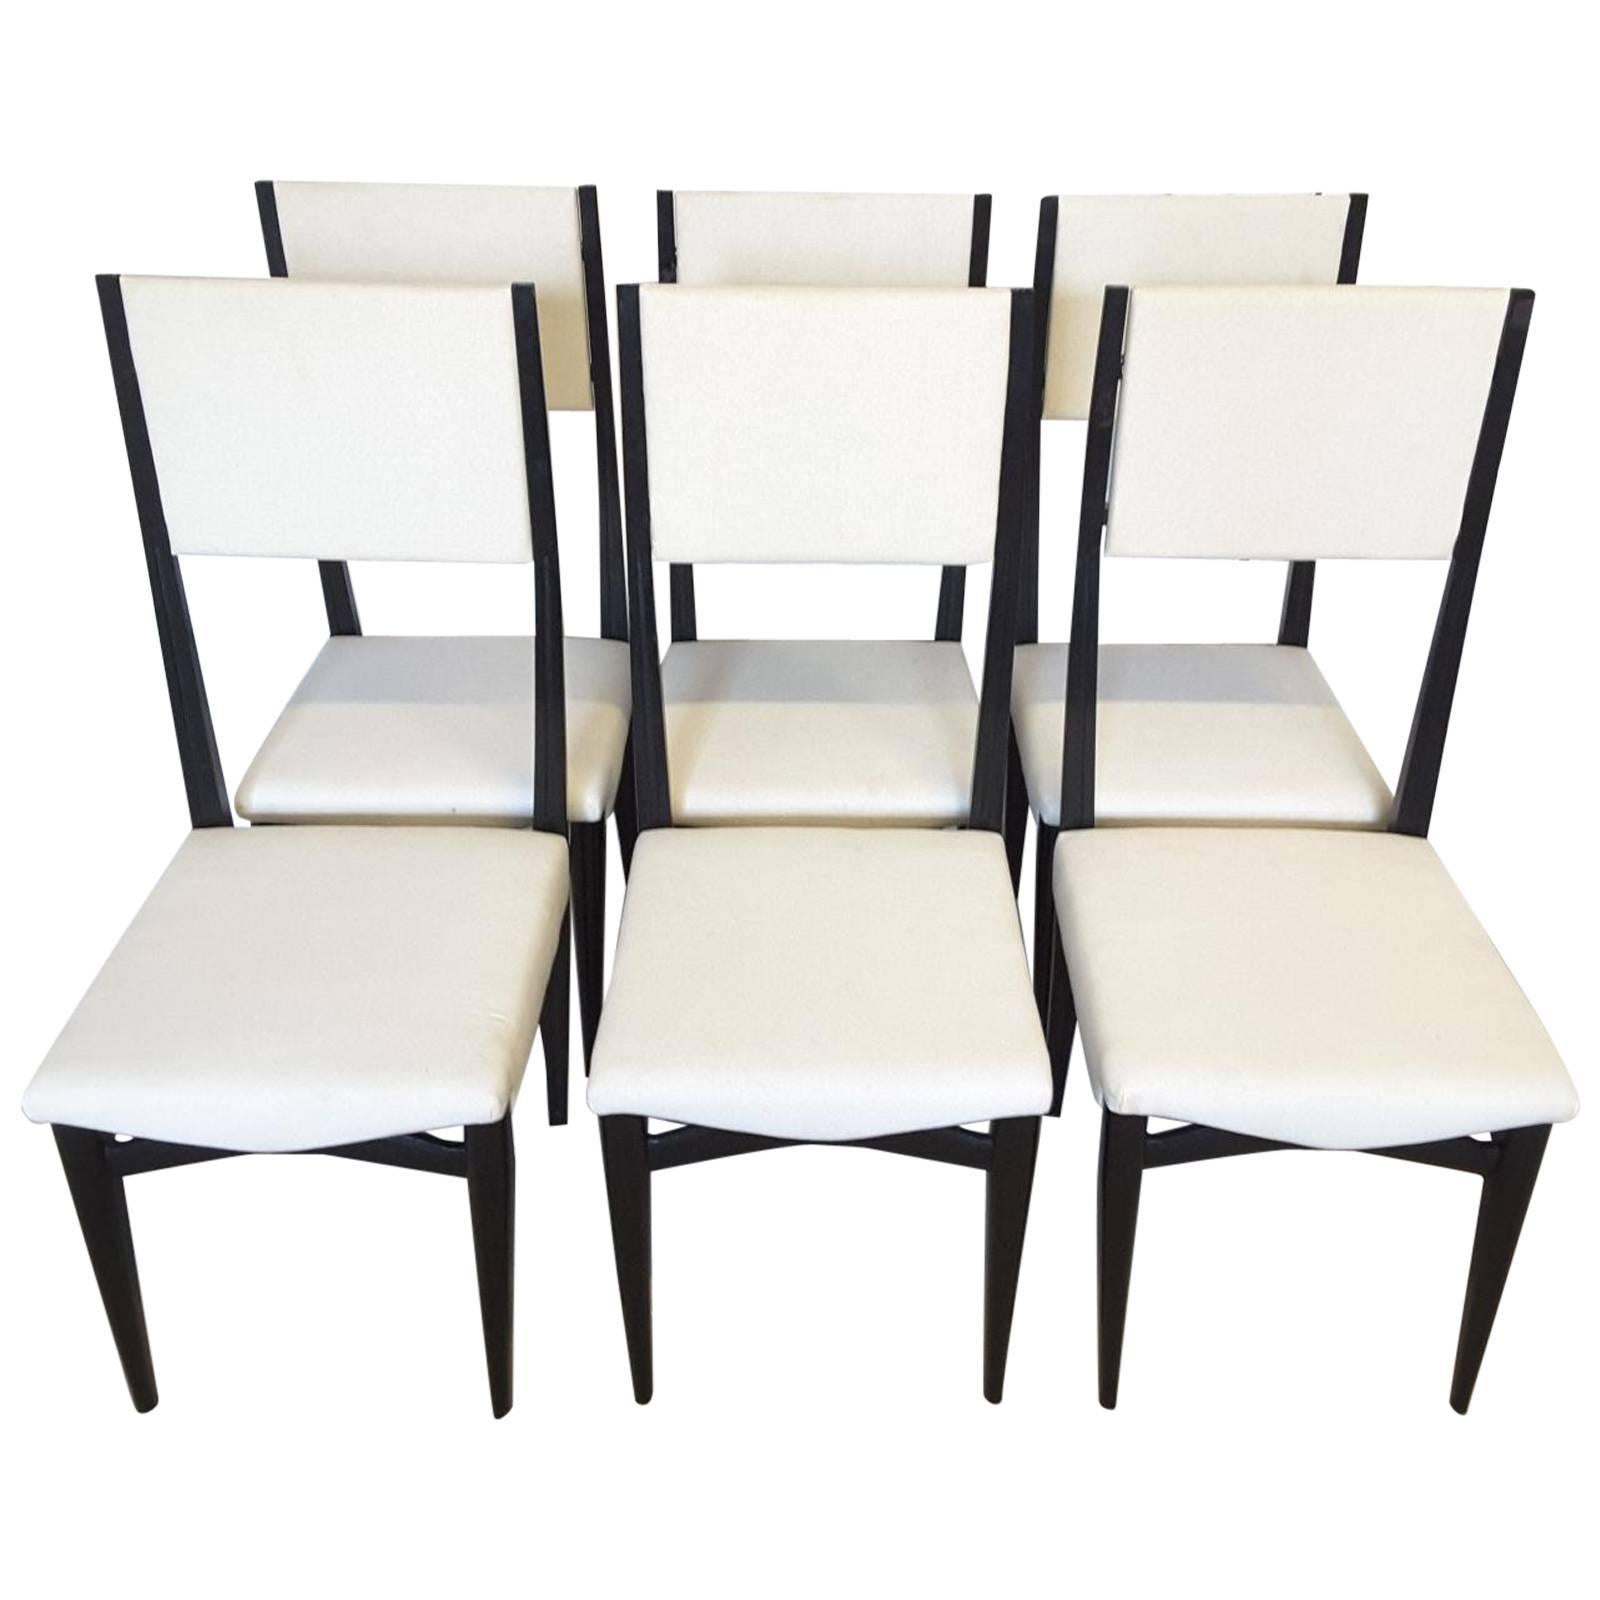 Set of Six Italian Mid-Century Modern High Back Dining Chairs For Sale